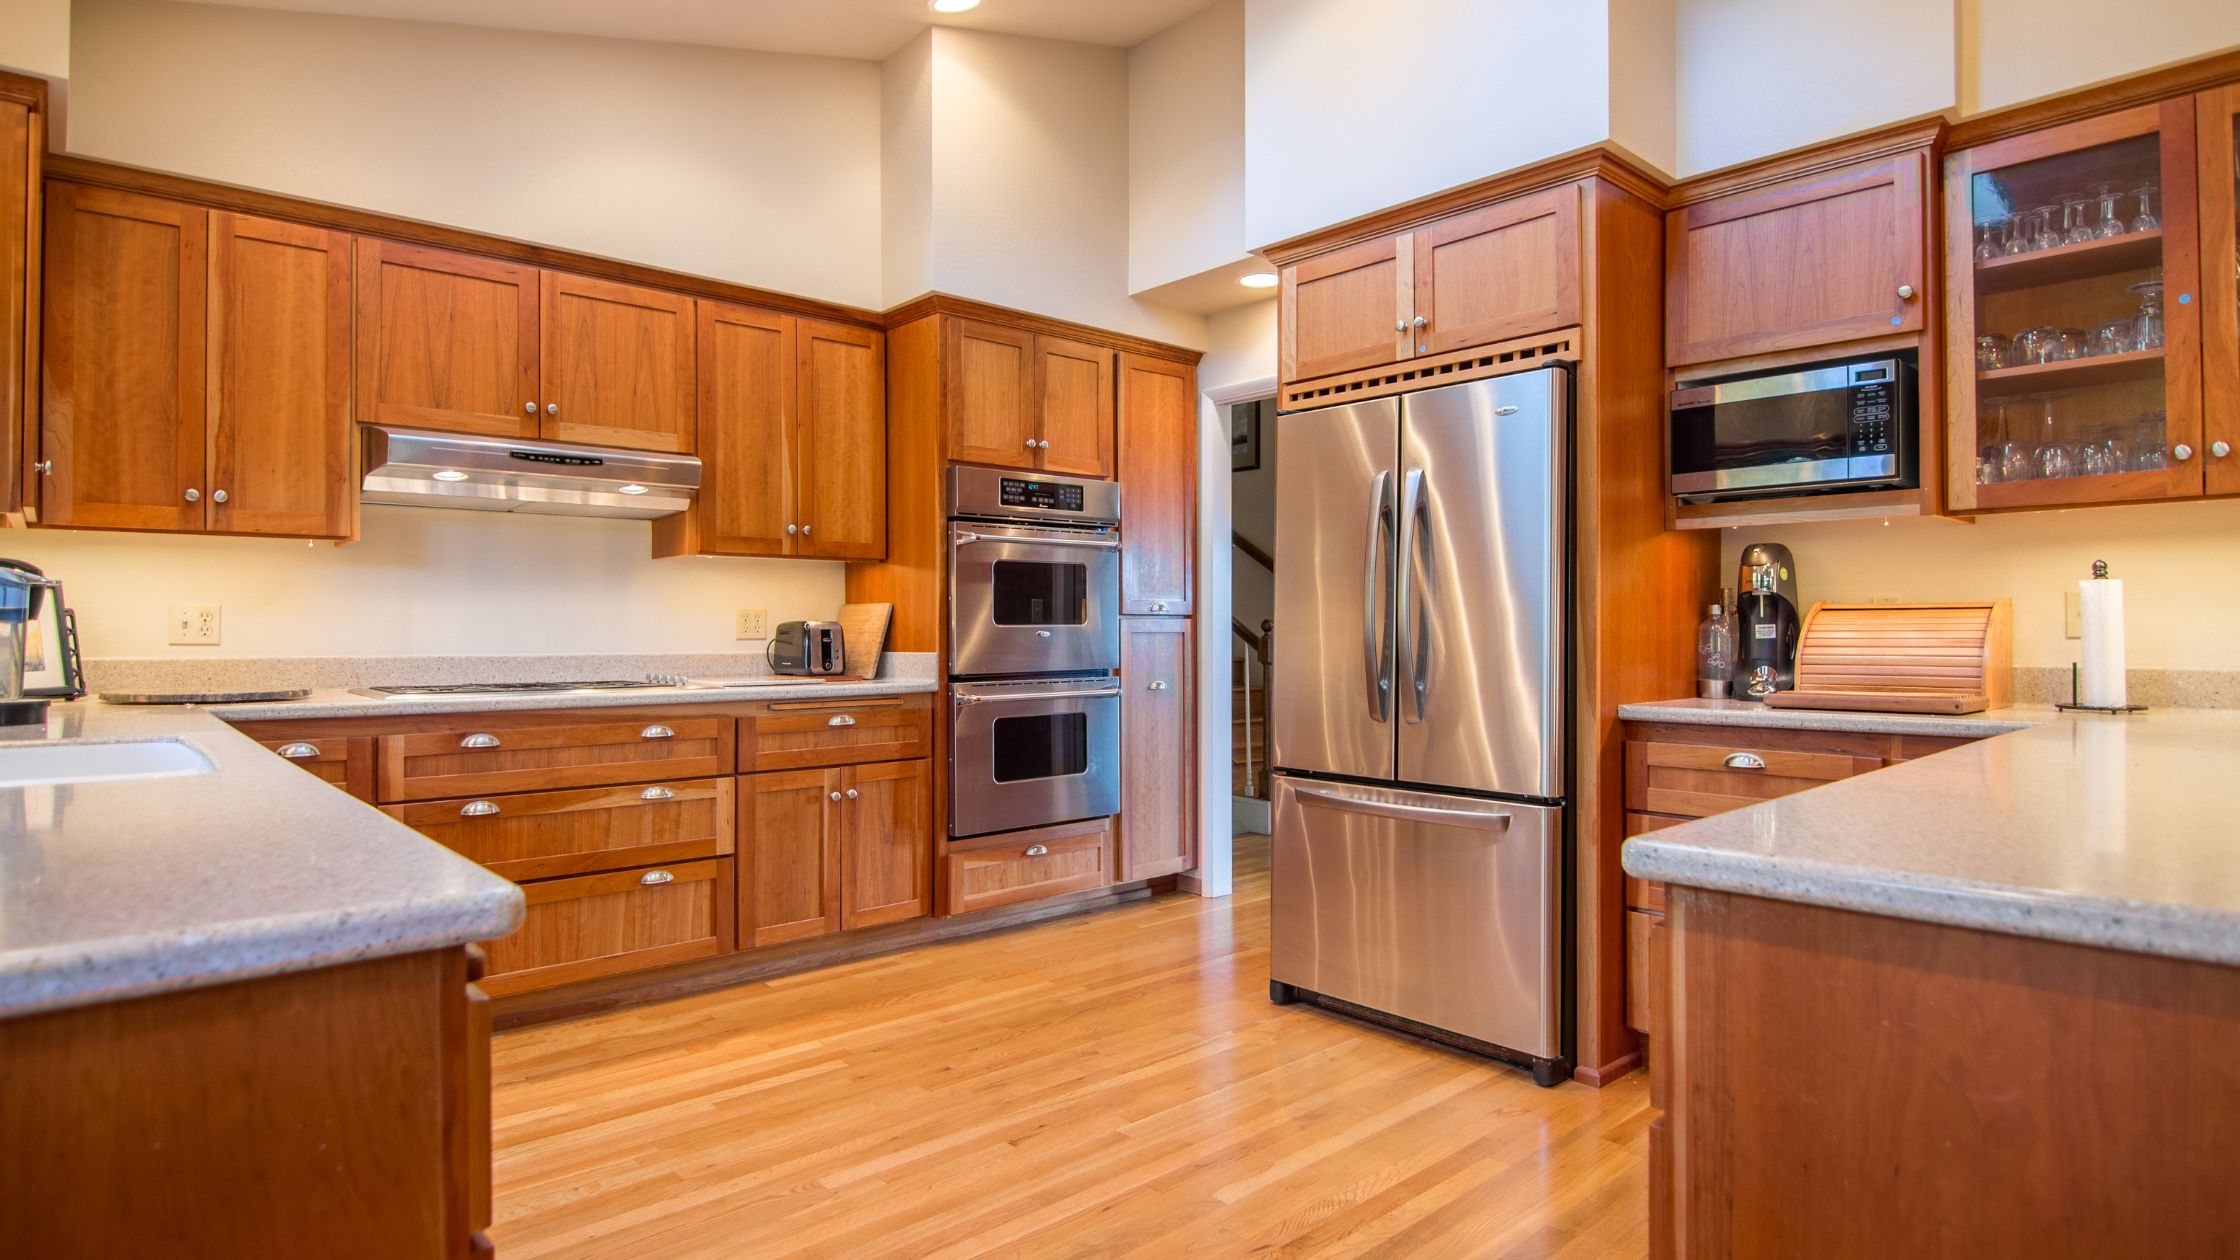 The Benefits of Wooden Cabinets